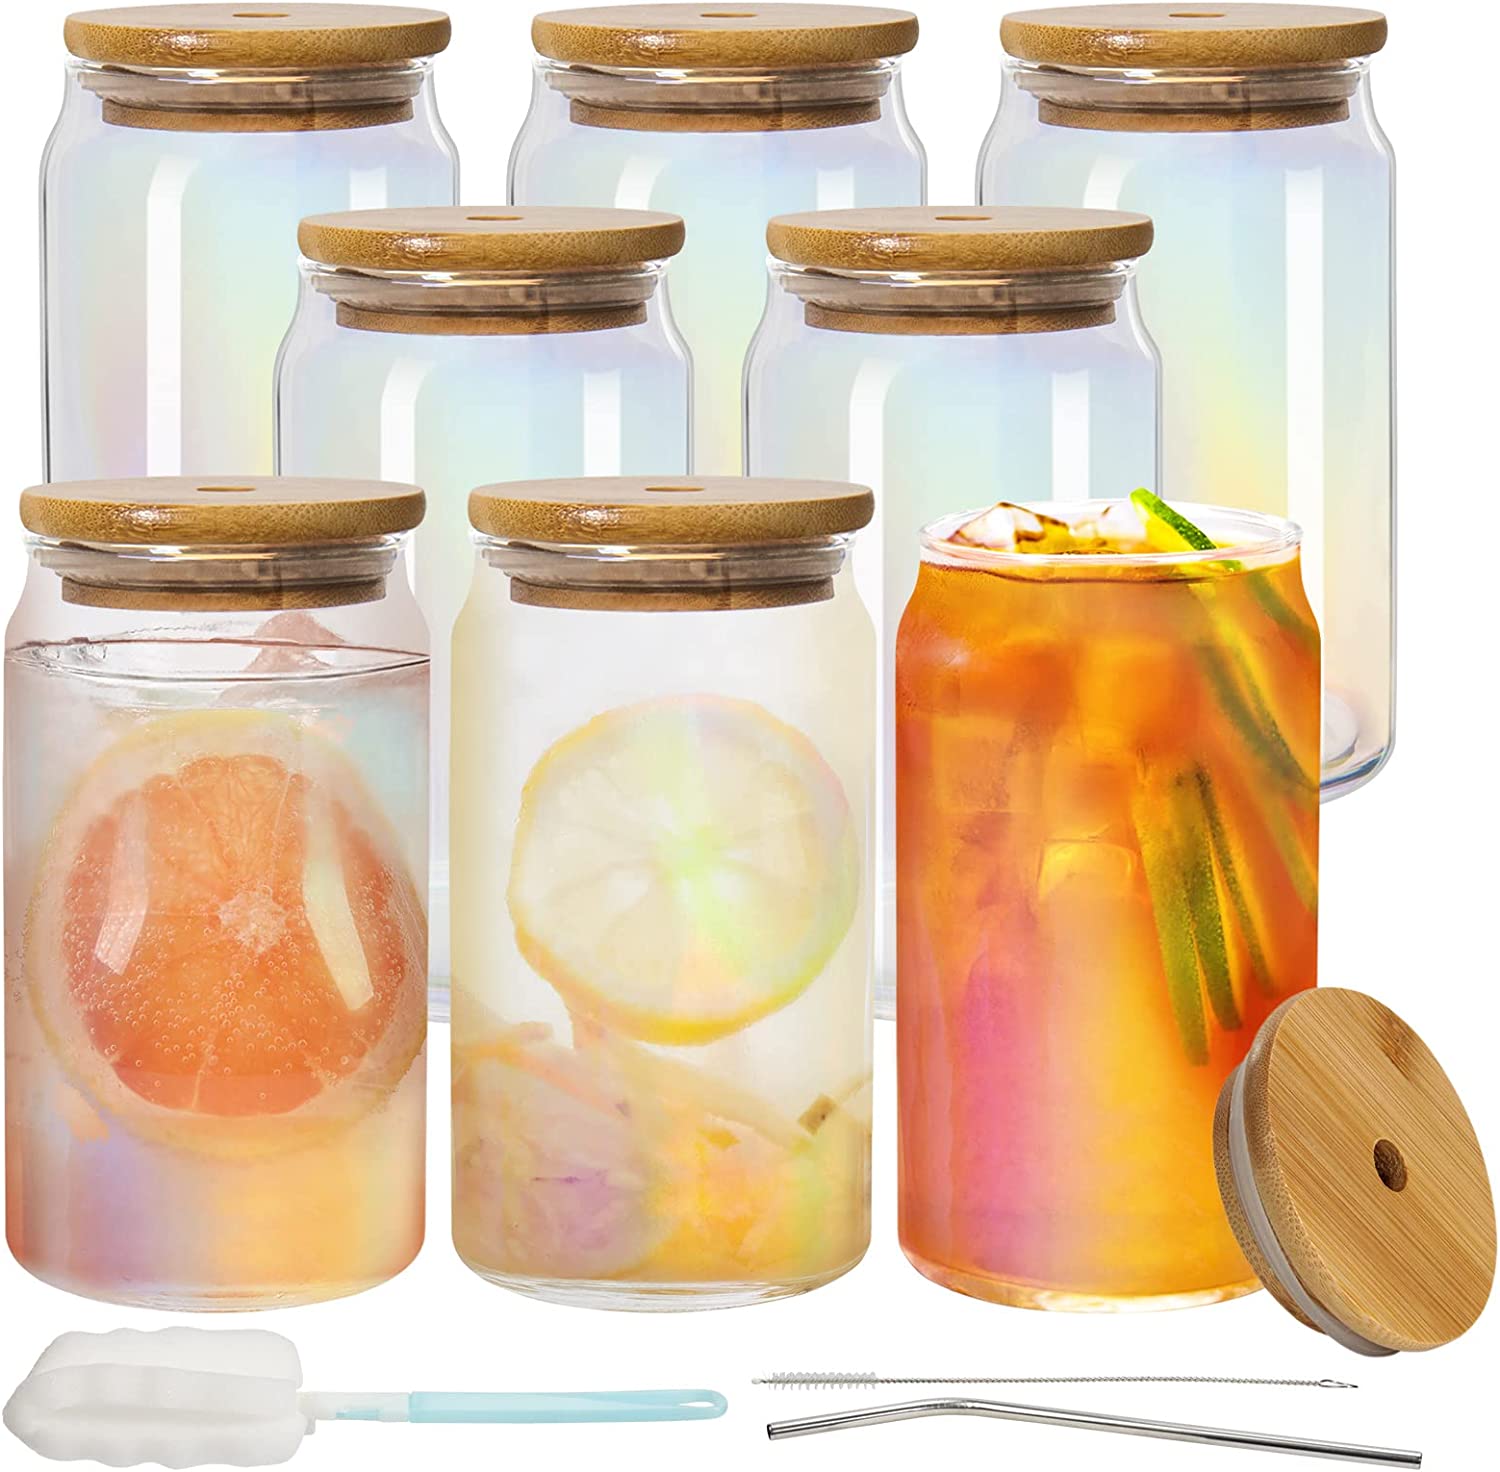 AJARAERA 20 oz glass cups with Lids and Straws,Beer glasses,Drinking glasses,  Iced coffee cup,glass cups of 12